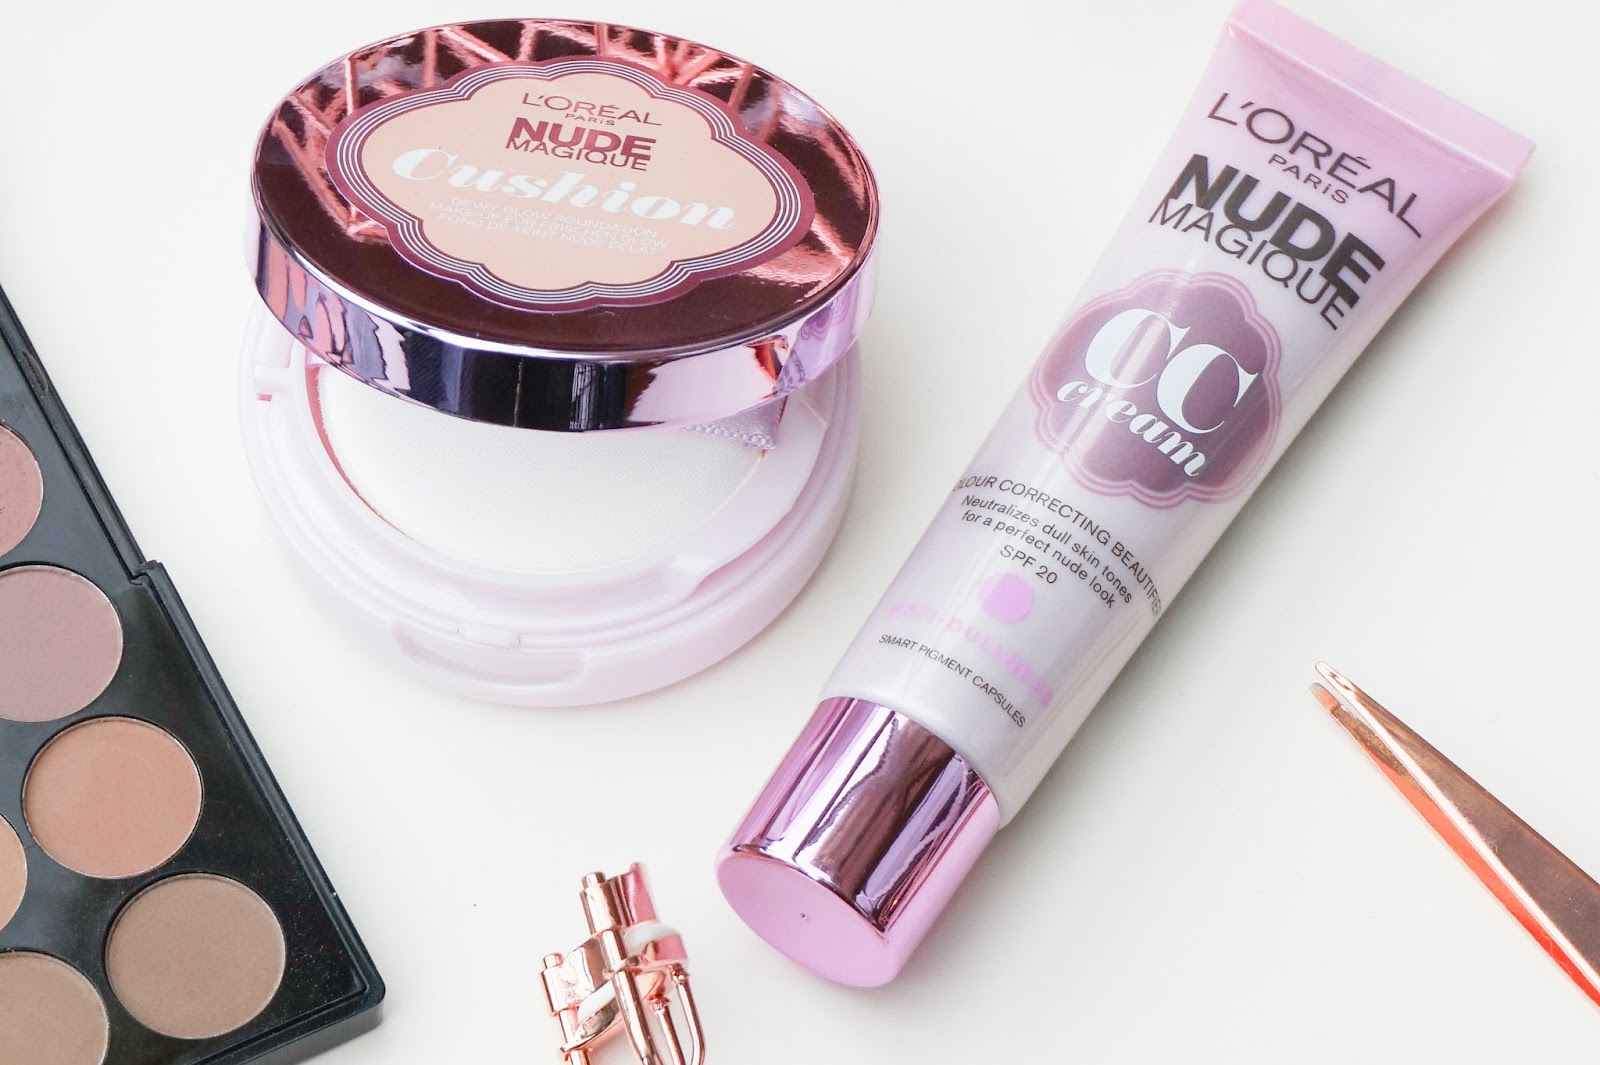 Beauty: lOreal Nude Magique Cushion Foundation review 01 